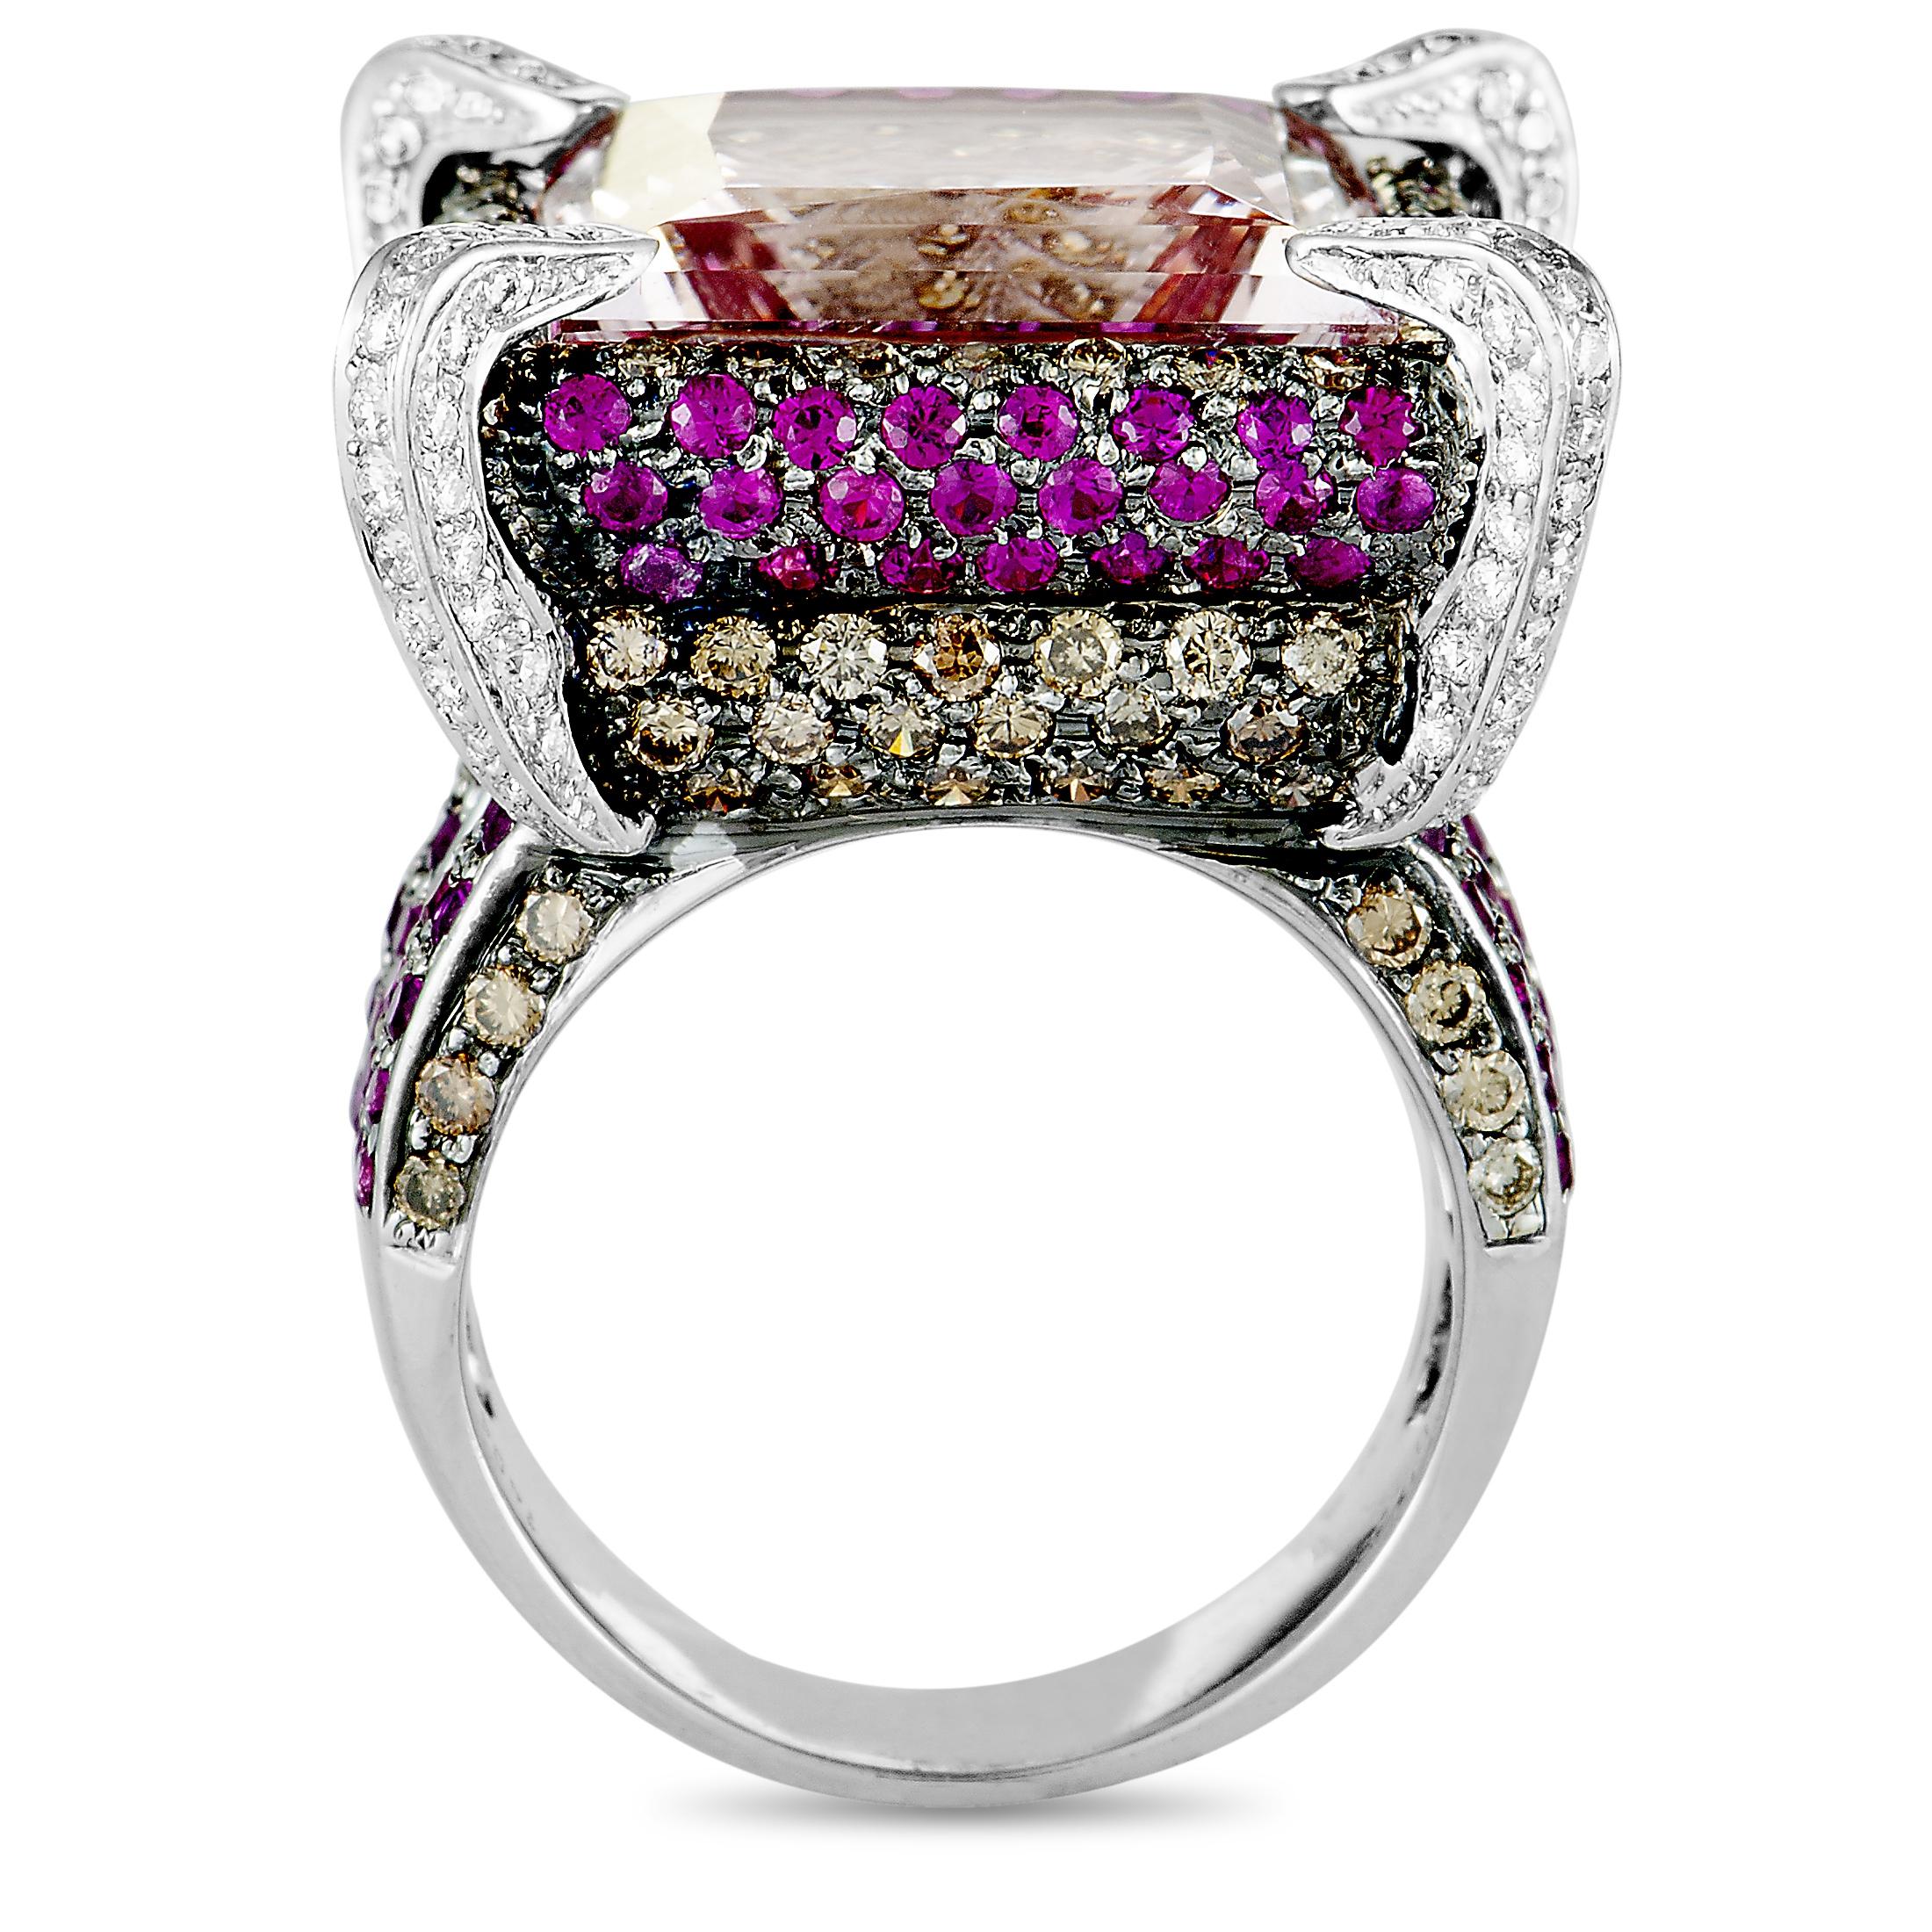 This ring is crafted from 18K white gold and set with rubies, a total of 2.25 carats of diamonds, and with a kunzite that weighs 14.94 carats. The ring weighs 19.3 grams, boasting band thickness of 5 mm and top height of 12 mm, while top dimensions